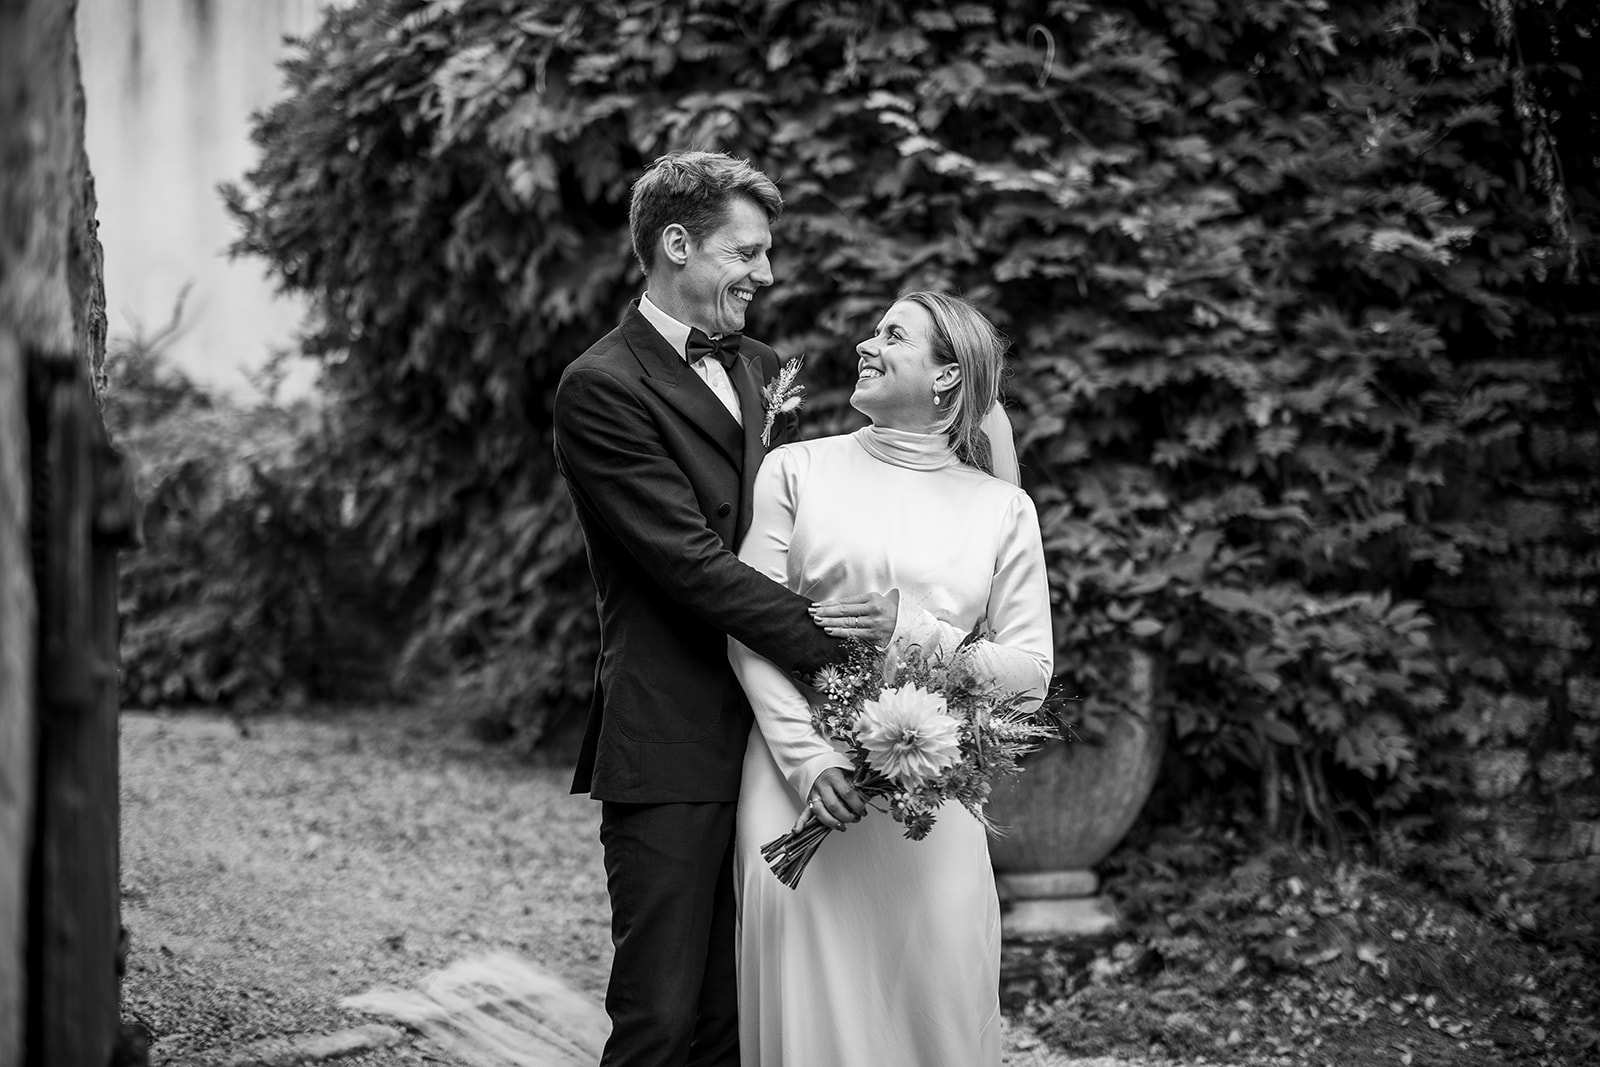 Destination wedding photography in France, black and white wedding photo